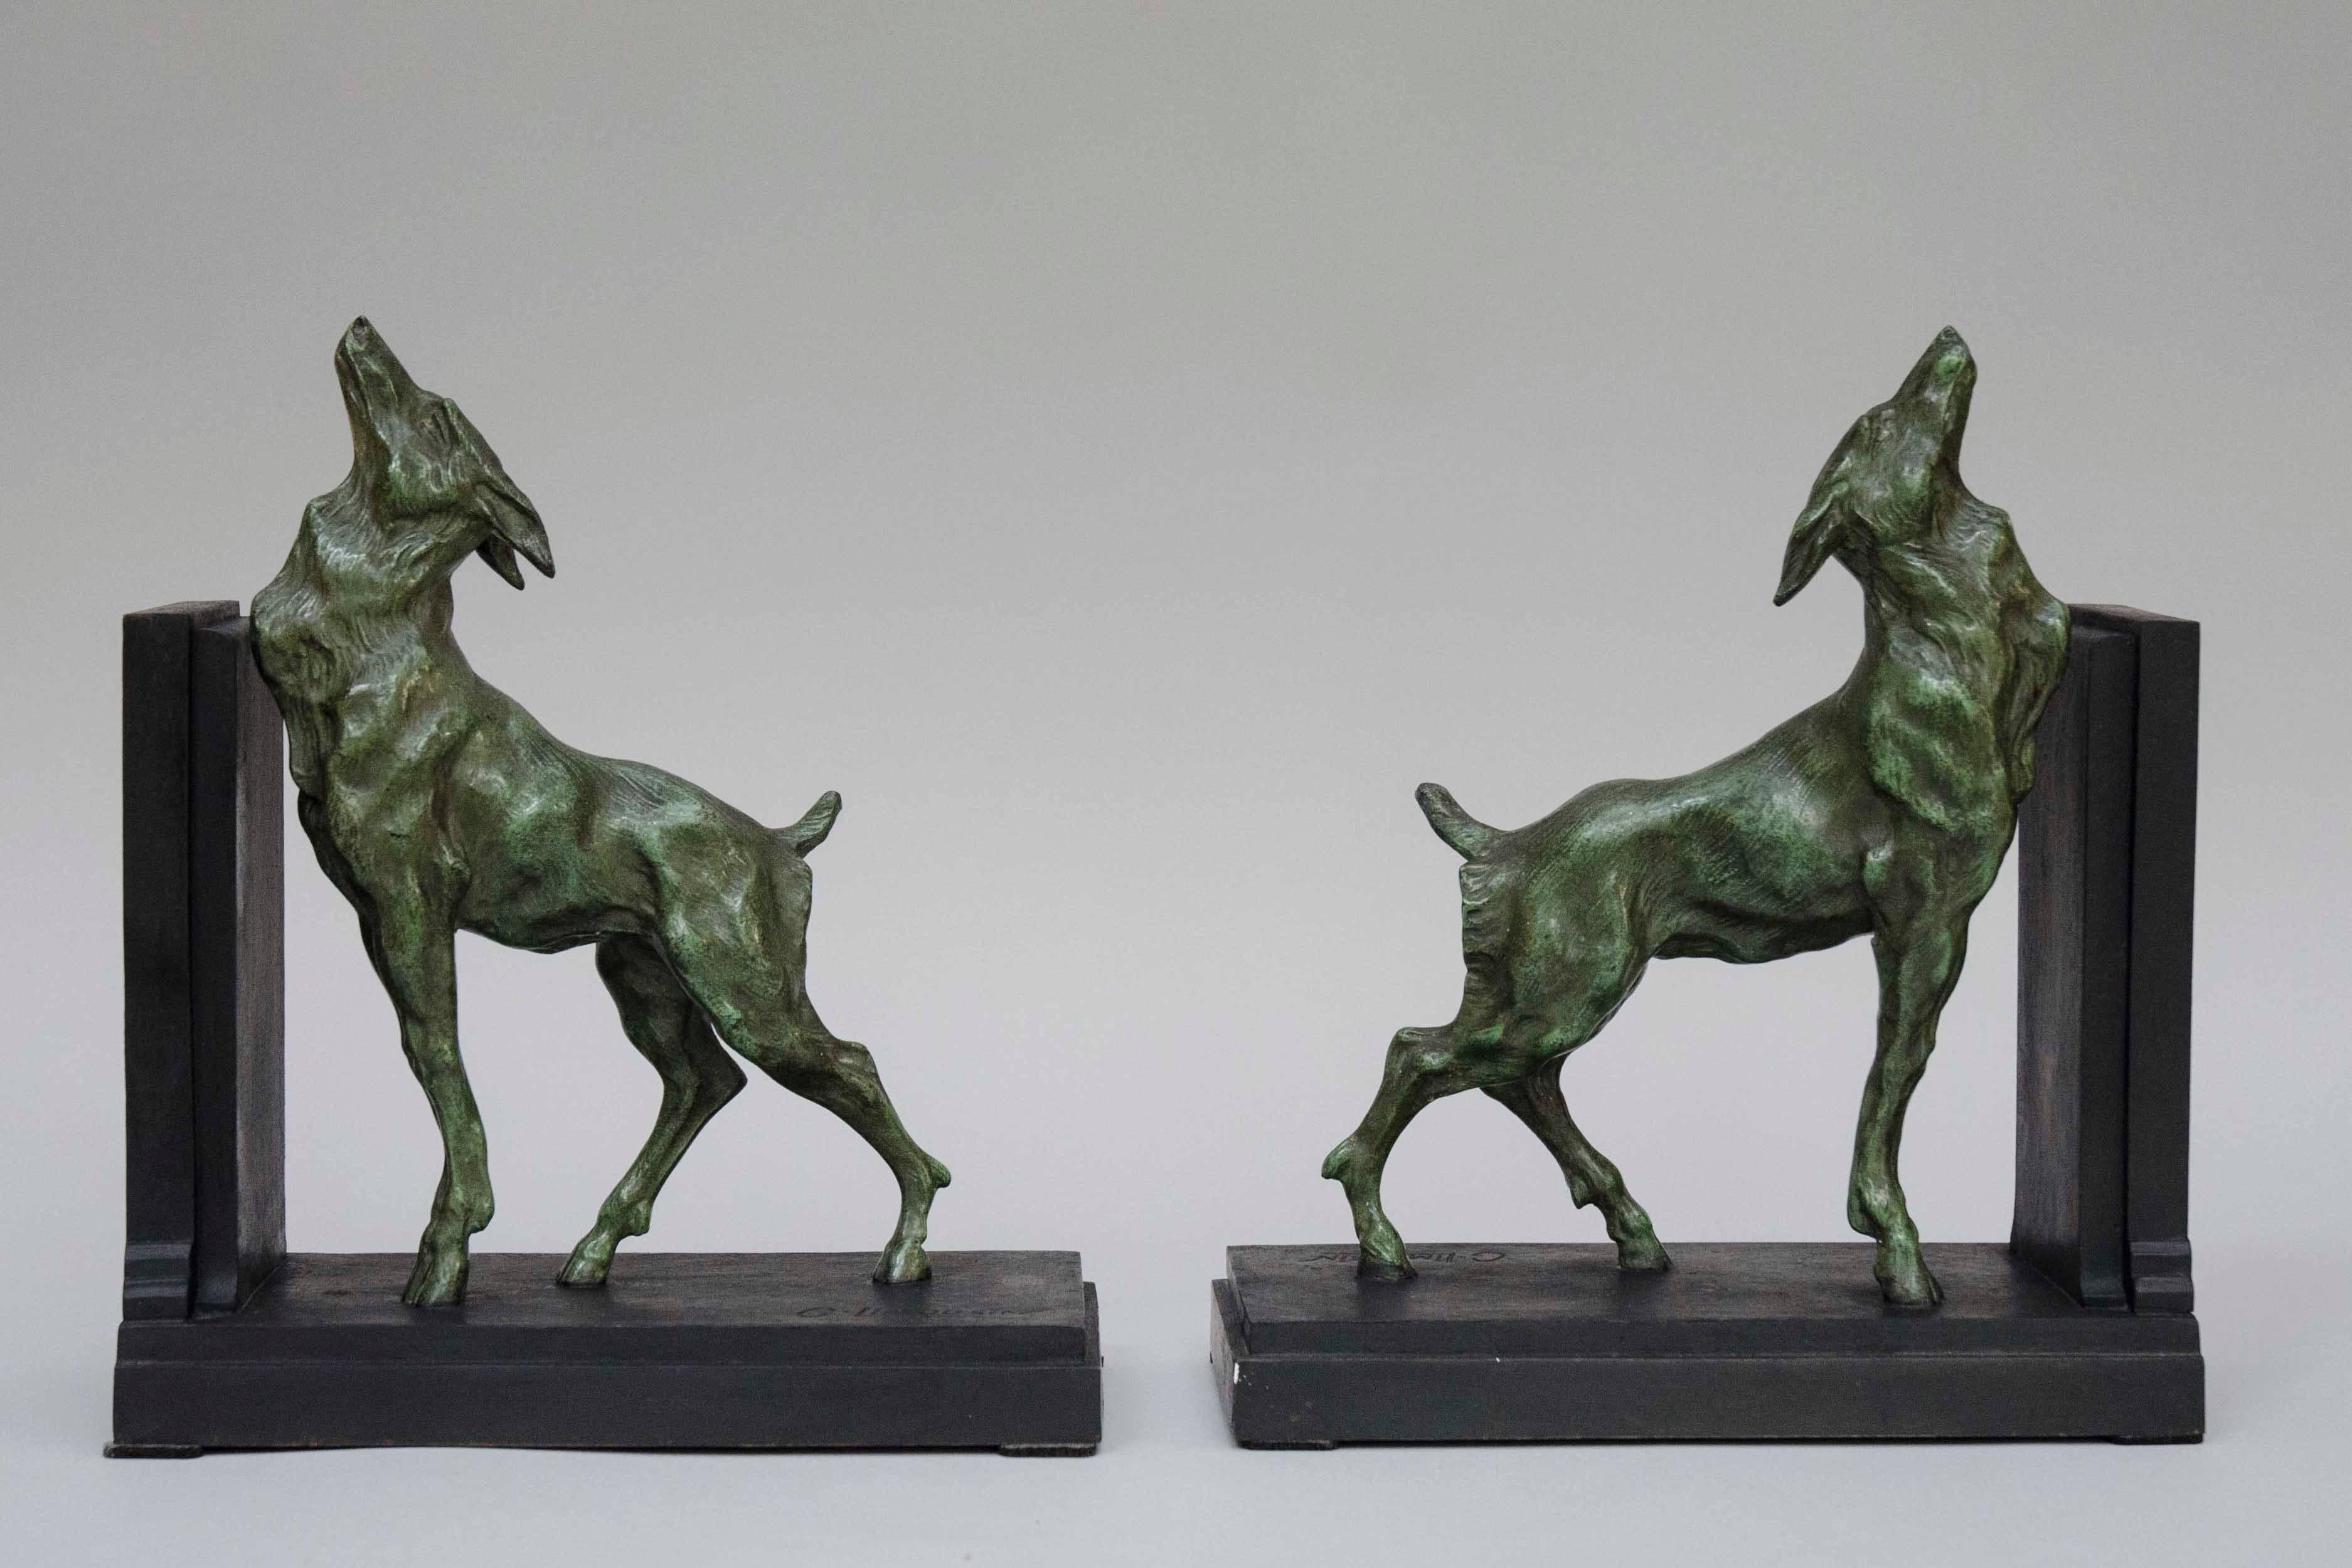 Beautiful and very decorative pair of bookend of the Art Deco period signed G. Limousin and marked with a stamp of French fabrication.
Pair of green patinated goats with elegant attitude on black bases. Bronze and brass.
Size: H 25cm x W 21cm x D